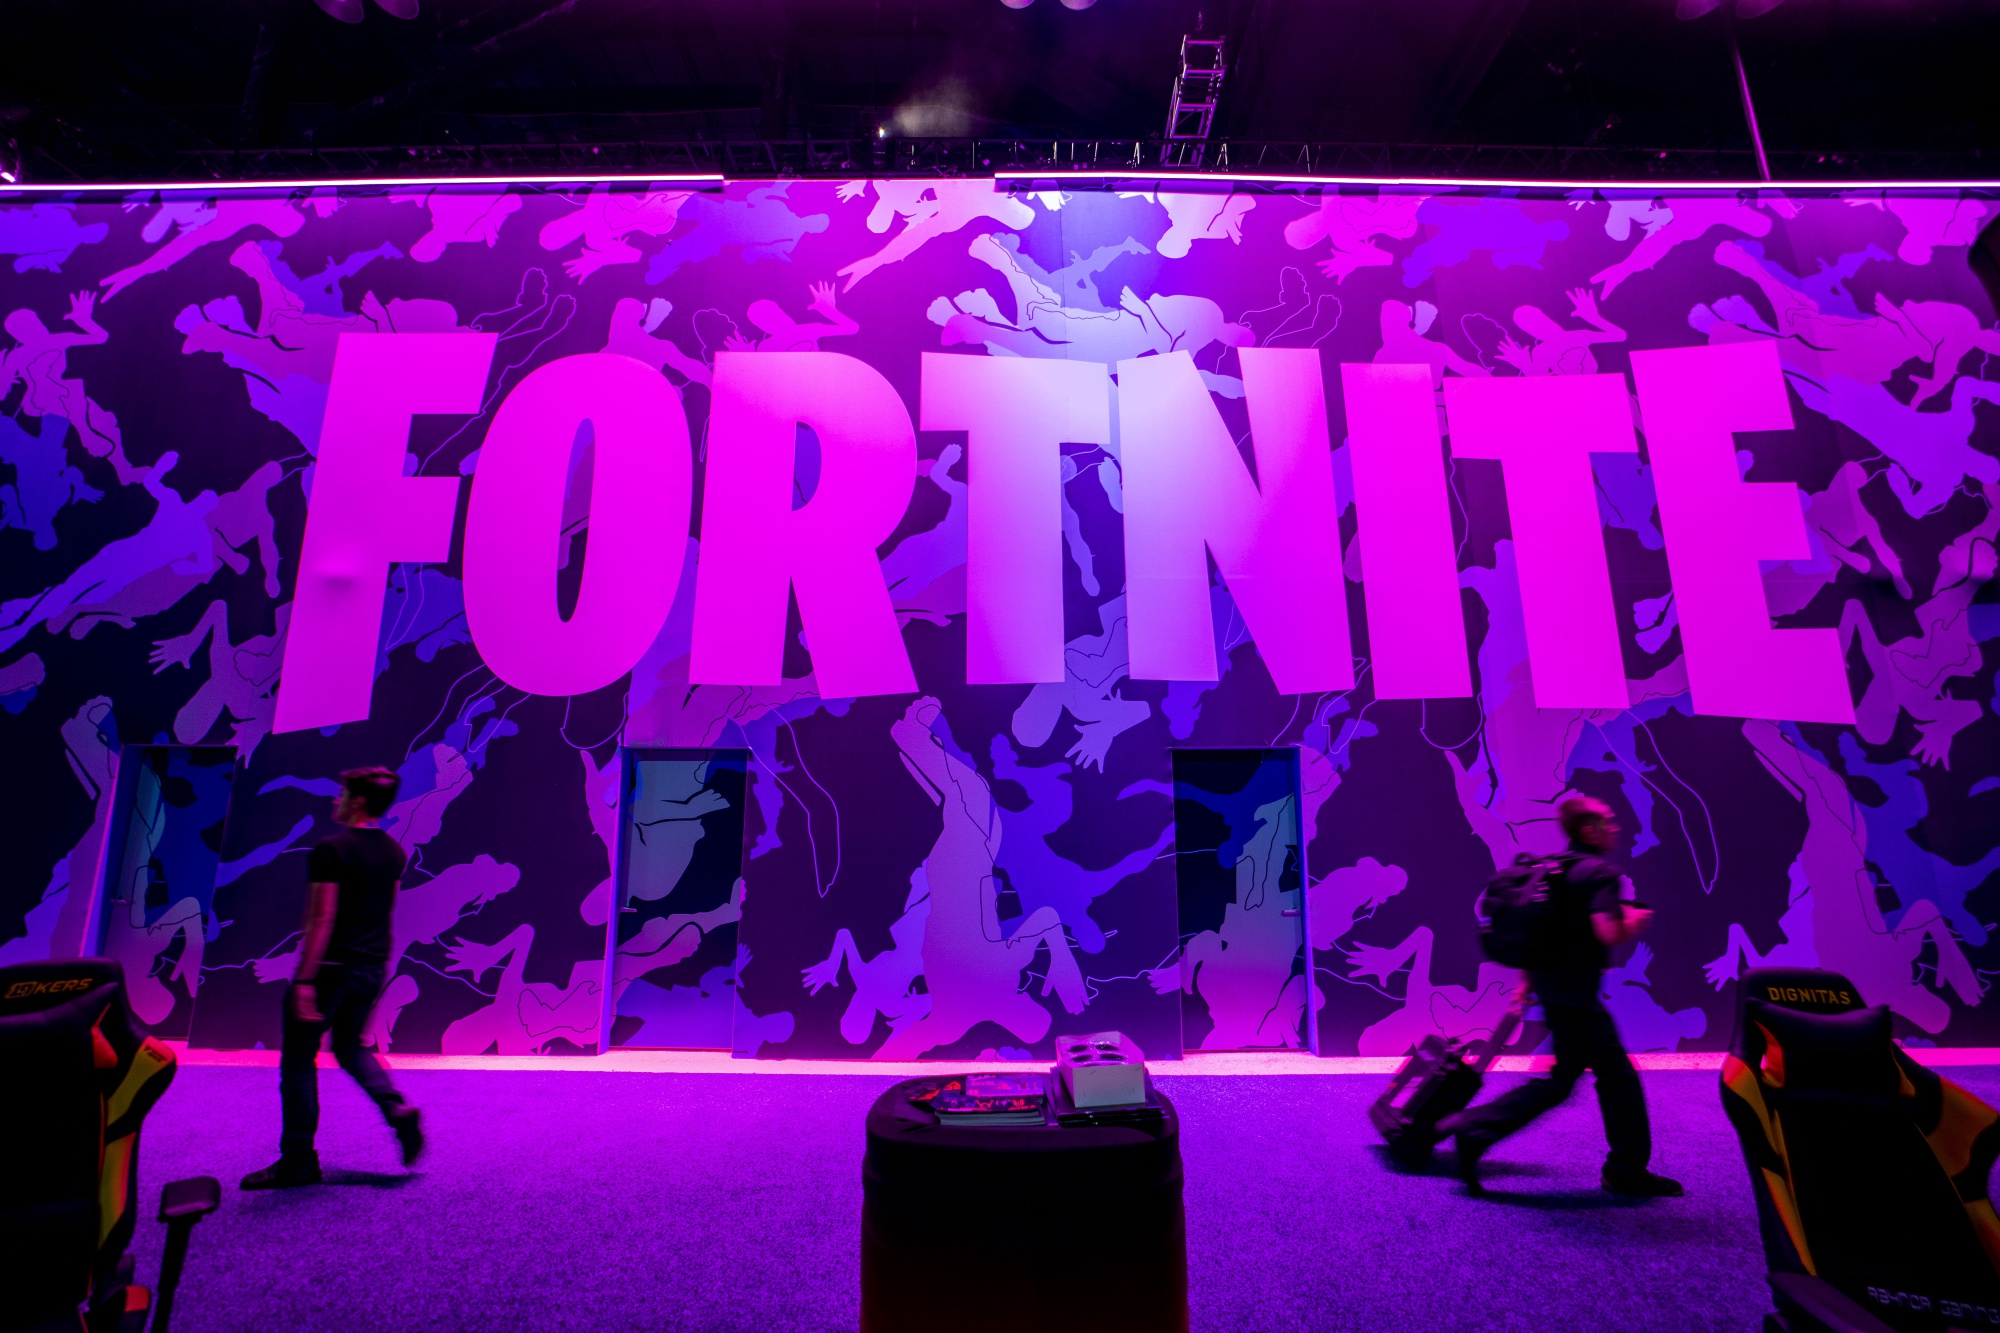 Stolen Fortnite accounts reportedly earn hackers millions per year